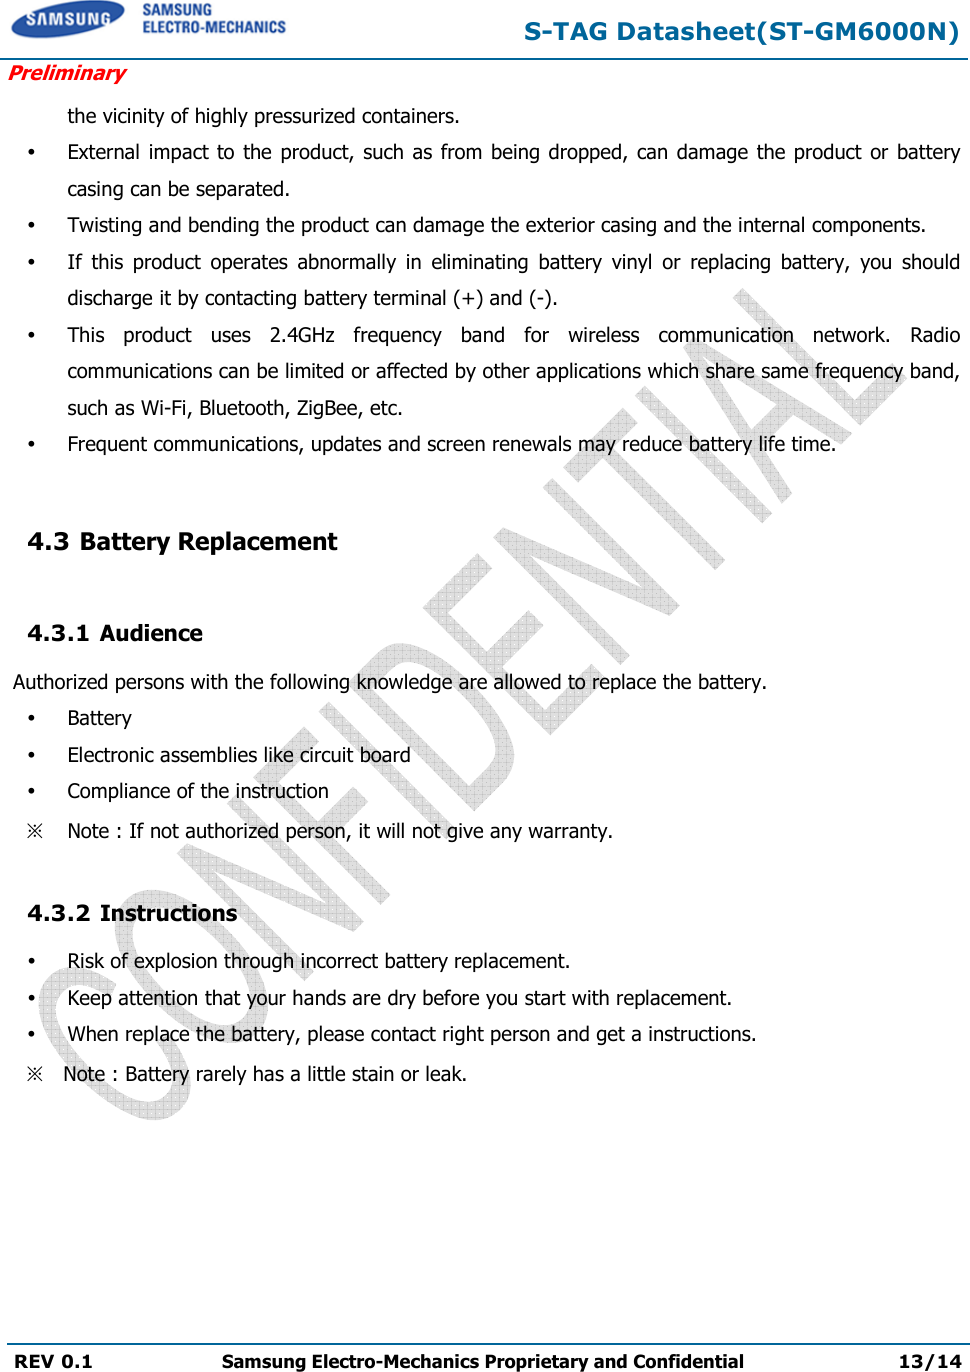 S-TAG Datasheet(ST-GM6000N) Preliminary REV 0.1  Samsung Electro-Mechanics Proprietary and Confidential 13/14 the vicinity of highly pressurized containers. External  impact to  the product, such  as from being dropped, can damage the product or batterycasing can be separated.Twisting and bending the product can damage the exterior casing and the internal components.If  this  product  operates  abnormally  in  eliminating  battery  vinyl  or  replacing  battery,  you  shoulddischarge it by contacting battery terminal (+) and (-).This  product  uses  2.4GHz  frequency  band  for  wireless  communication  network.  Radiocommunications can be limited or affected by other applications which share same frequency band,such as Wi-Fi, Bluetooth, ZigBee, etc.Frequent communications, updates and screen renewals may reduce battery life time.4.3 Battery Replacement 4.3.1 Audience  Authorized persons with the following knowledge are allowed to replace the battery. BatteryElectronic assemblies like circuit boardCompliance of the instruction※ Note : If not authorized person, it will not give any warranty. 4.3.2 Instructions Risk of explosion through incorrect battery replacement.Keep attention that your hands are dry before you start with replacement.When replace the battery, please contact right person and get a instructions.※ Note : Battery rarely has a little stain or leak. 